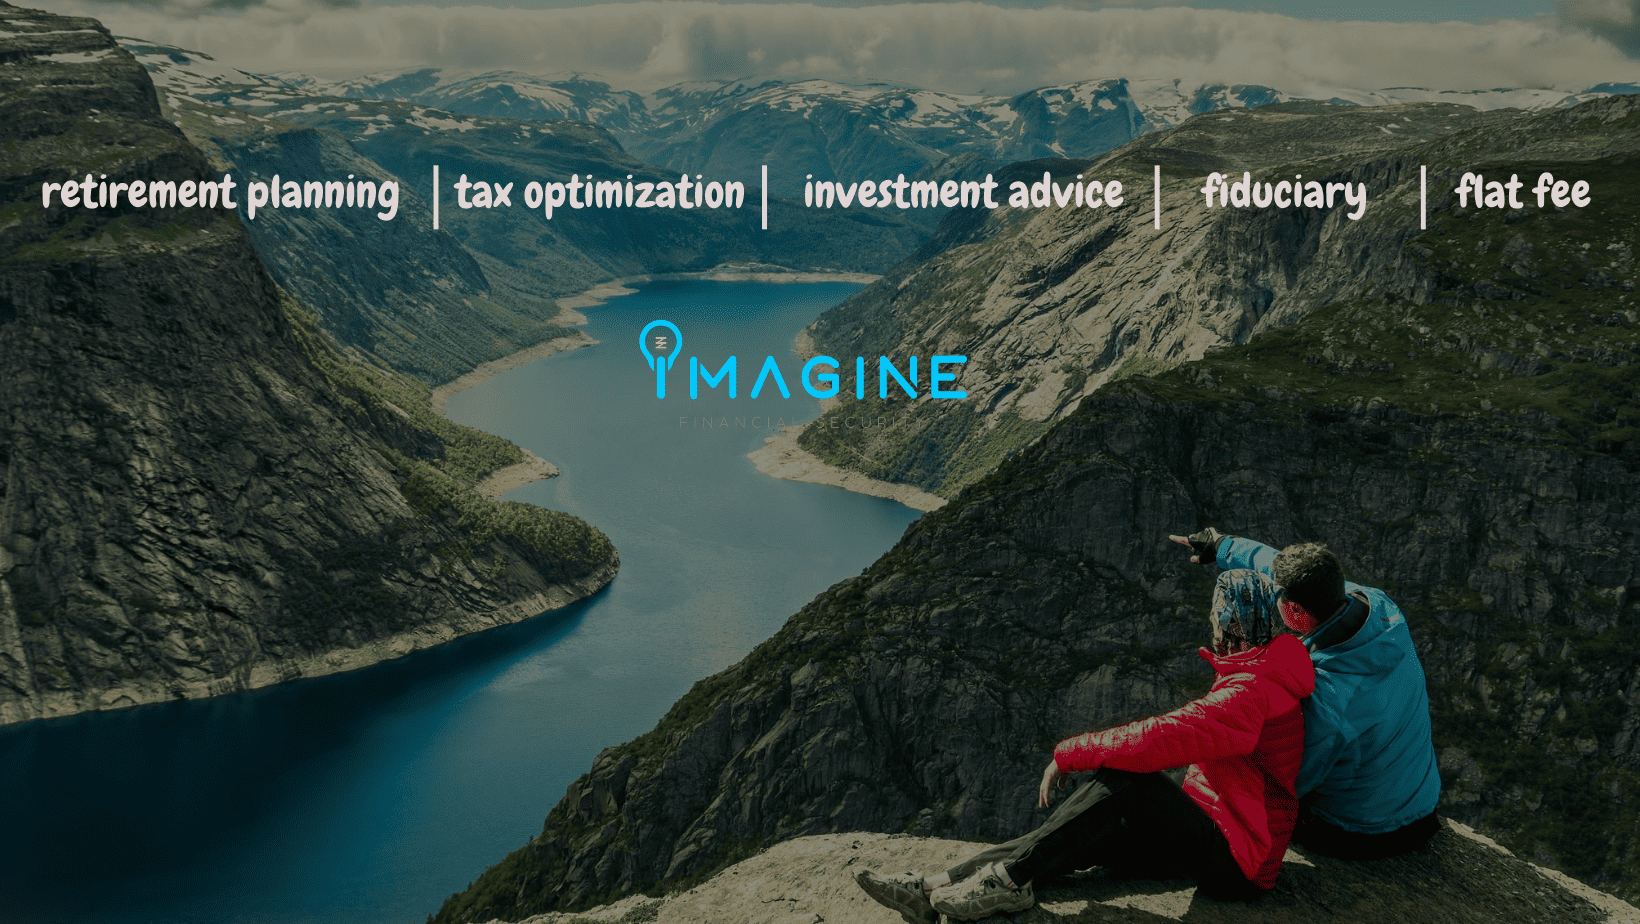 Two hikers enjoying the majestic view of a fjord from a mountain summit, while words related to financial services float across the sky, suggesting a metaphorical connection between strategic financial planning and far-reaching vistas.